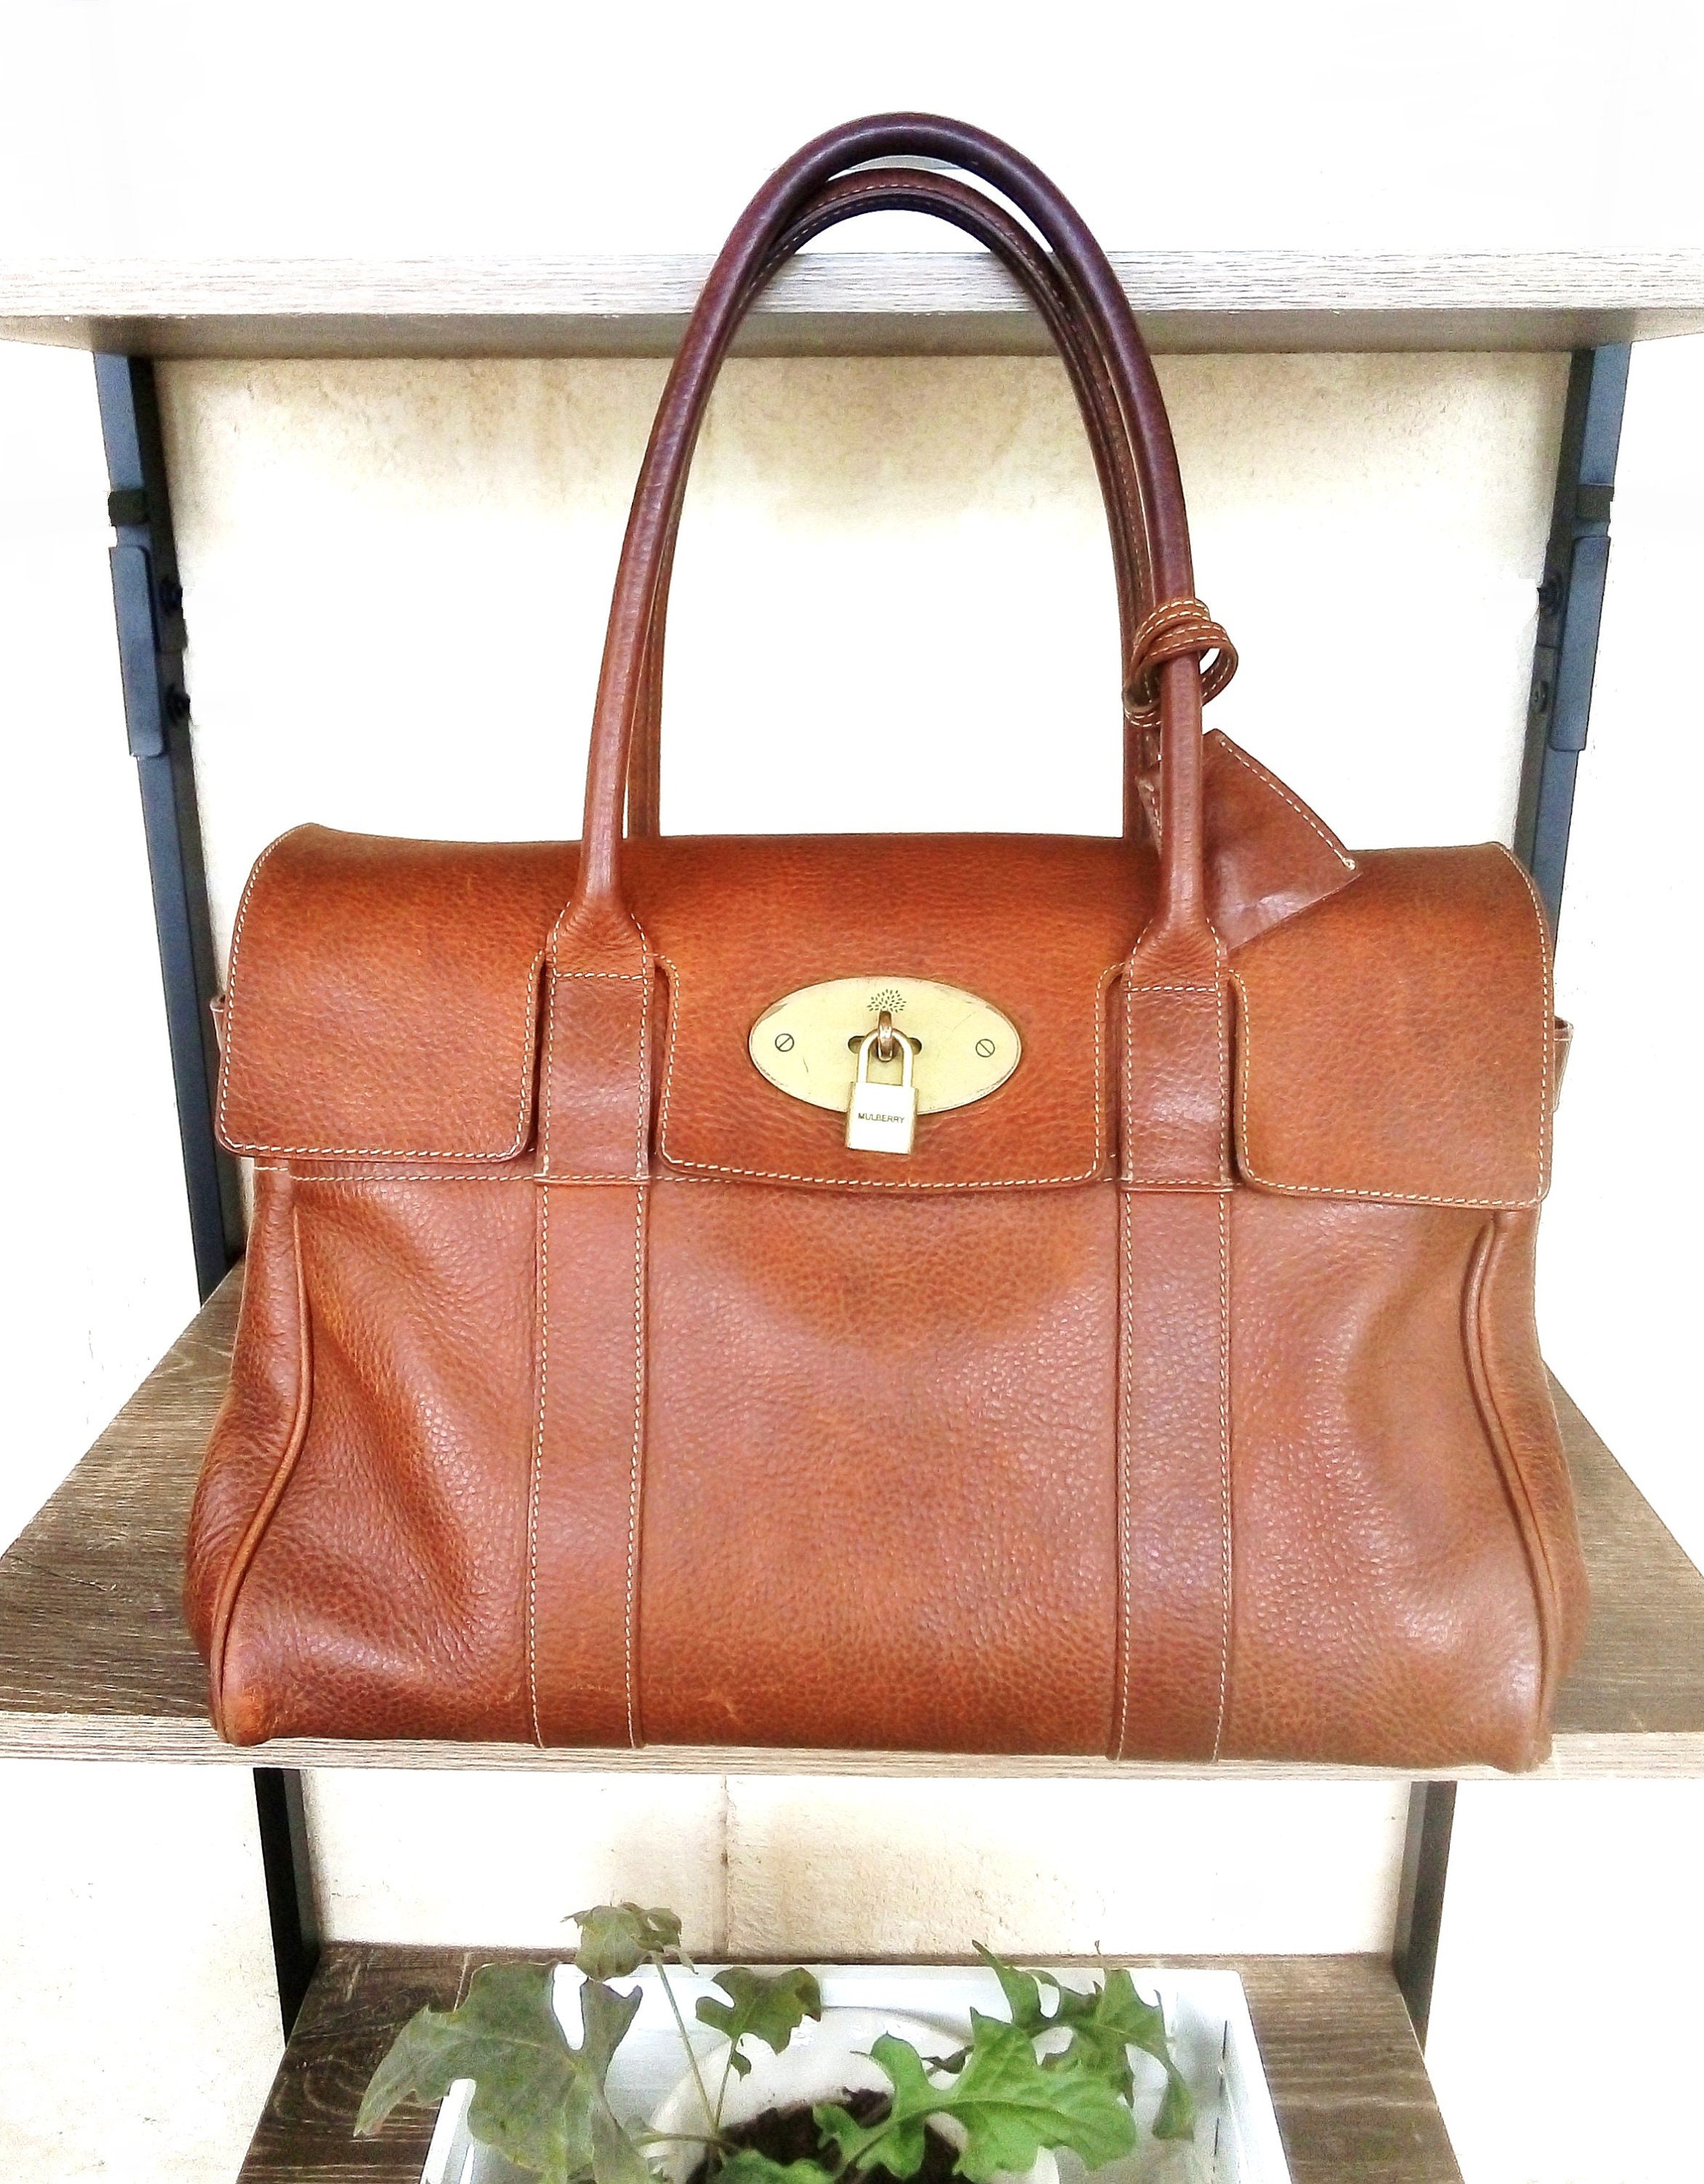 Mulberry Bayswater Bag: my honest review as a handbag collector - Fashion  For Lunch